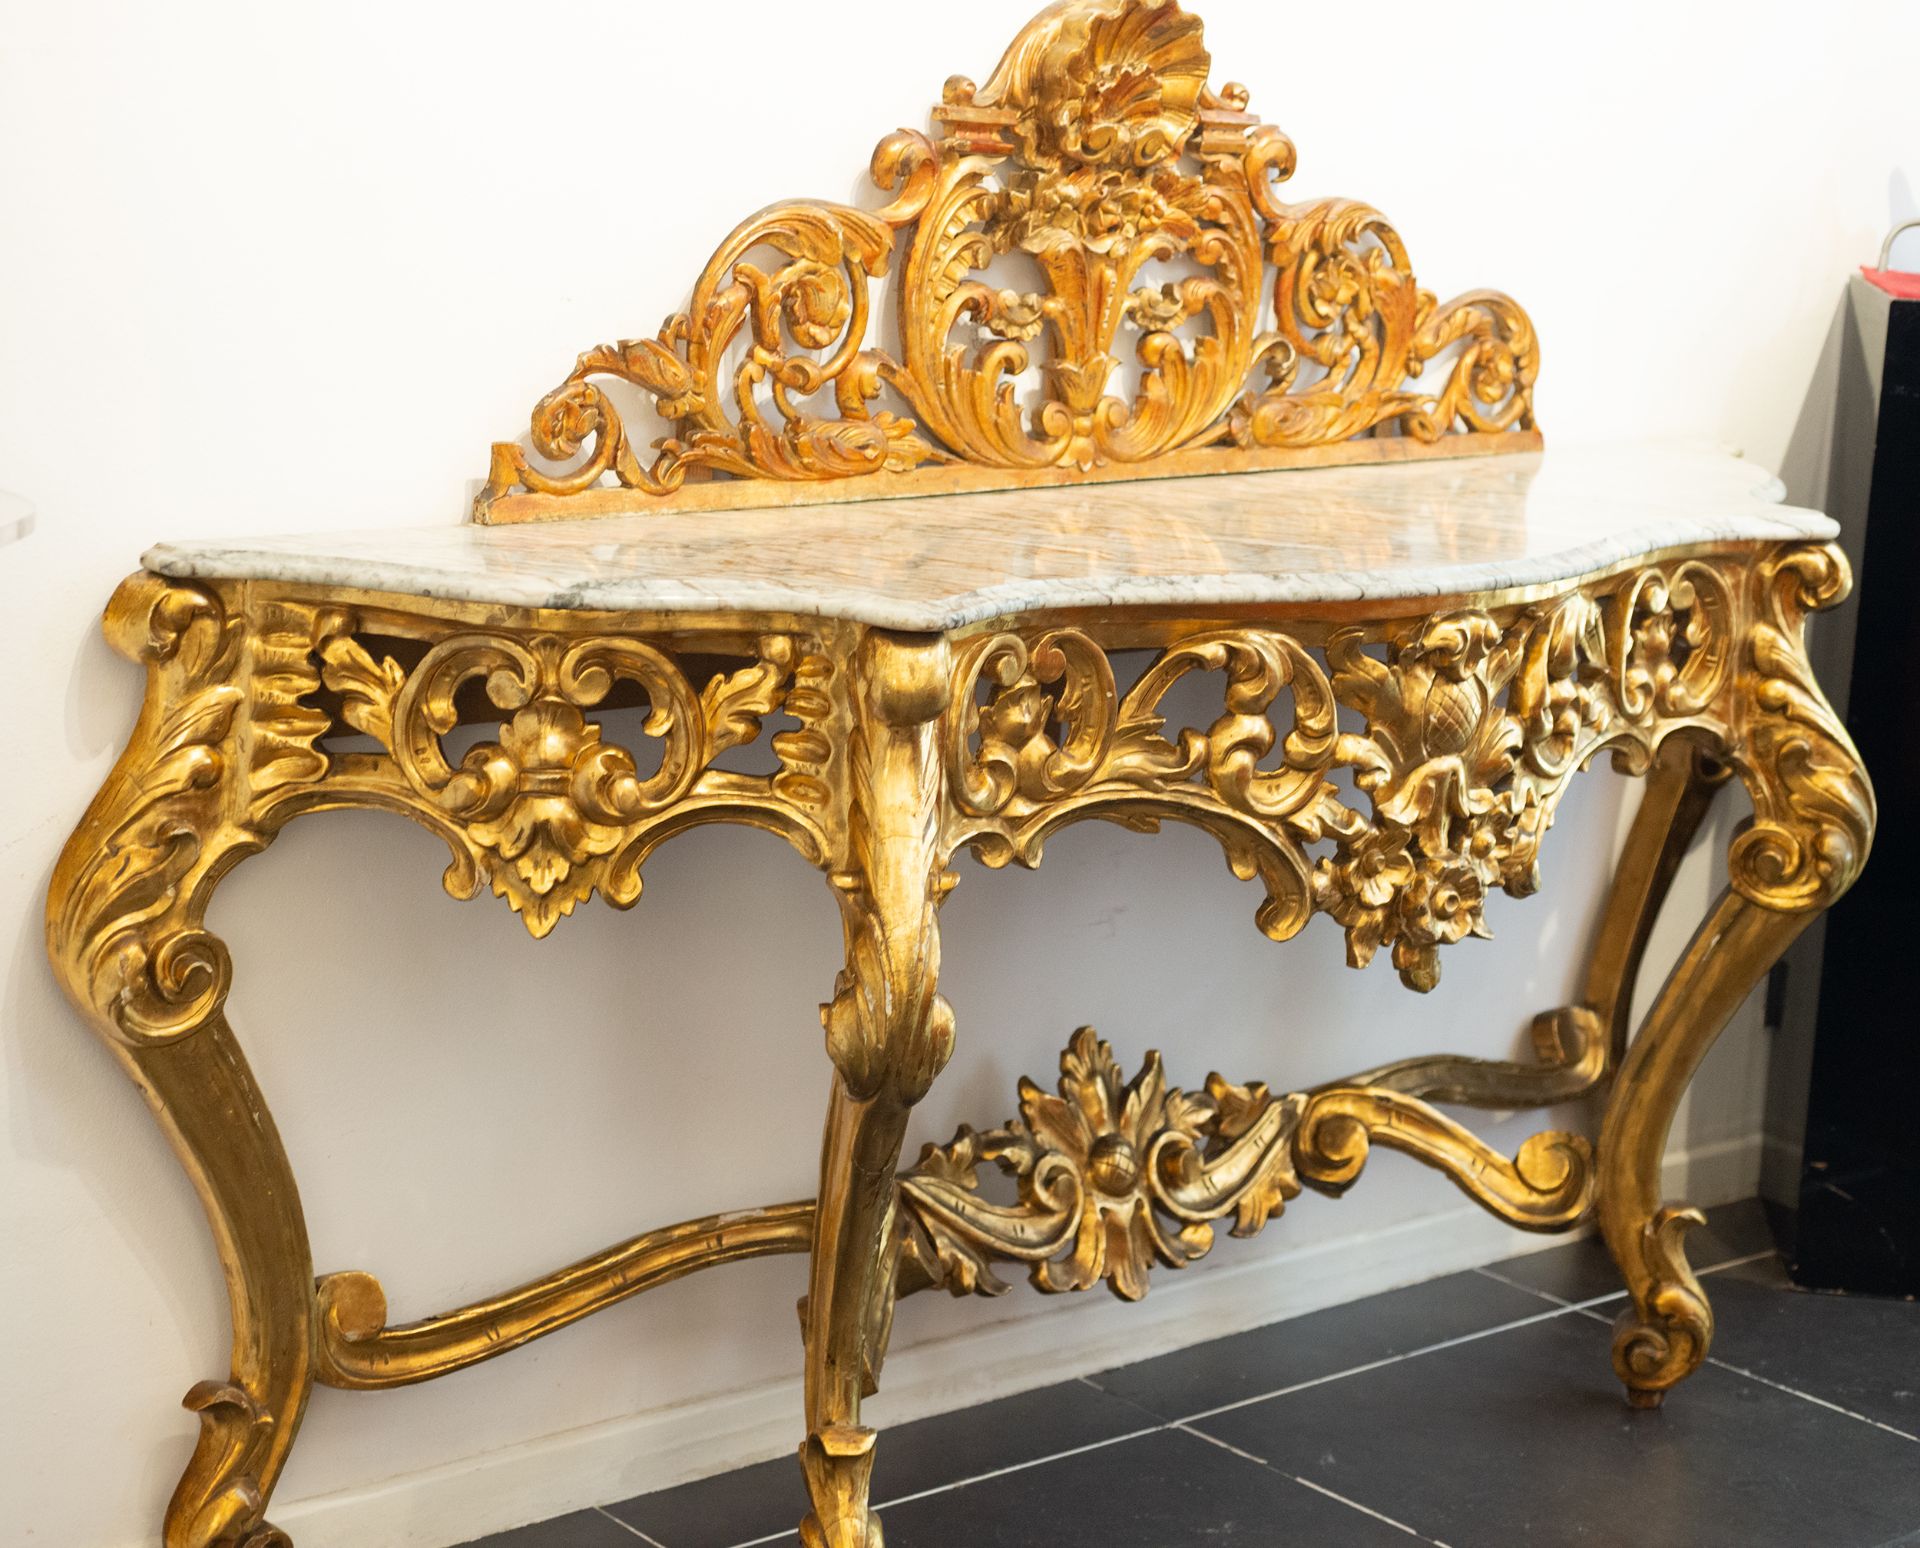 Italian console in gilt wood with gold leaf, Italian school of the 19th century - Image 3 of 7